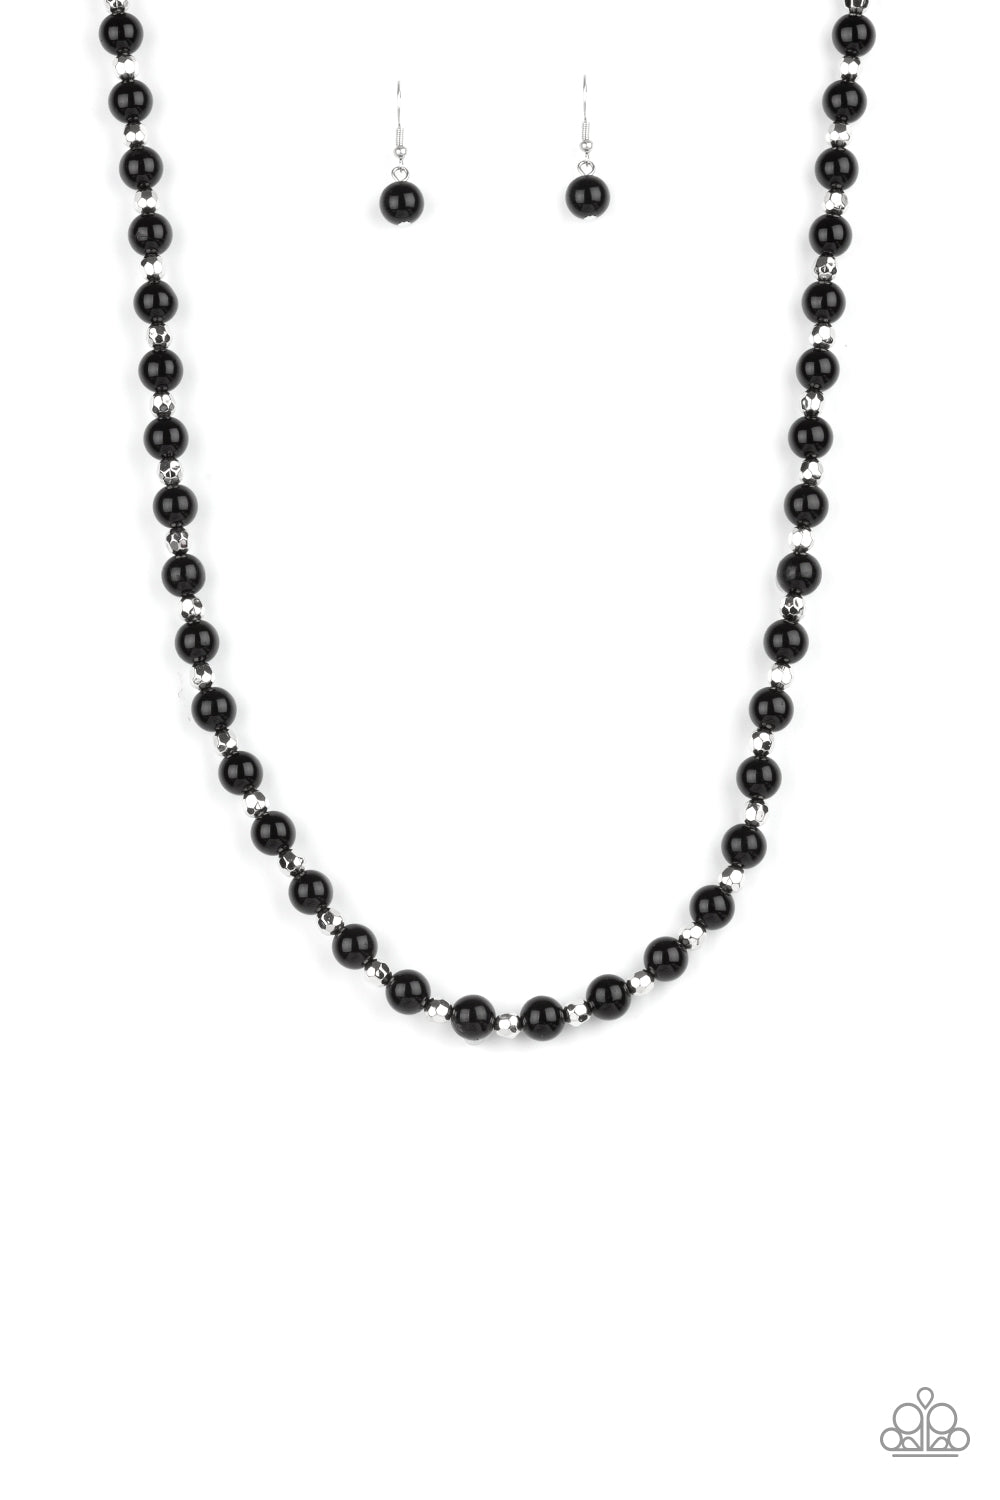 Nautical Novelty Black Necklace - Paparazzi Accessories  Classic black and faceted silver beads alternate along an invisible wire below the collar, creating a timeless twist. Features an adjustable clasp closure.  All Paparazzi Accessories are lead free and nickel free!  Sold as one individual necklace. Includes one pair of matching earrings.